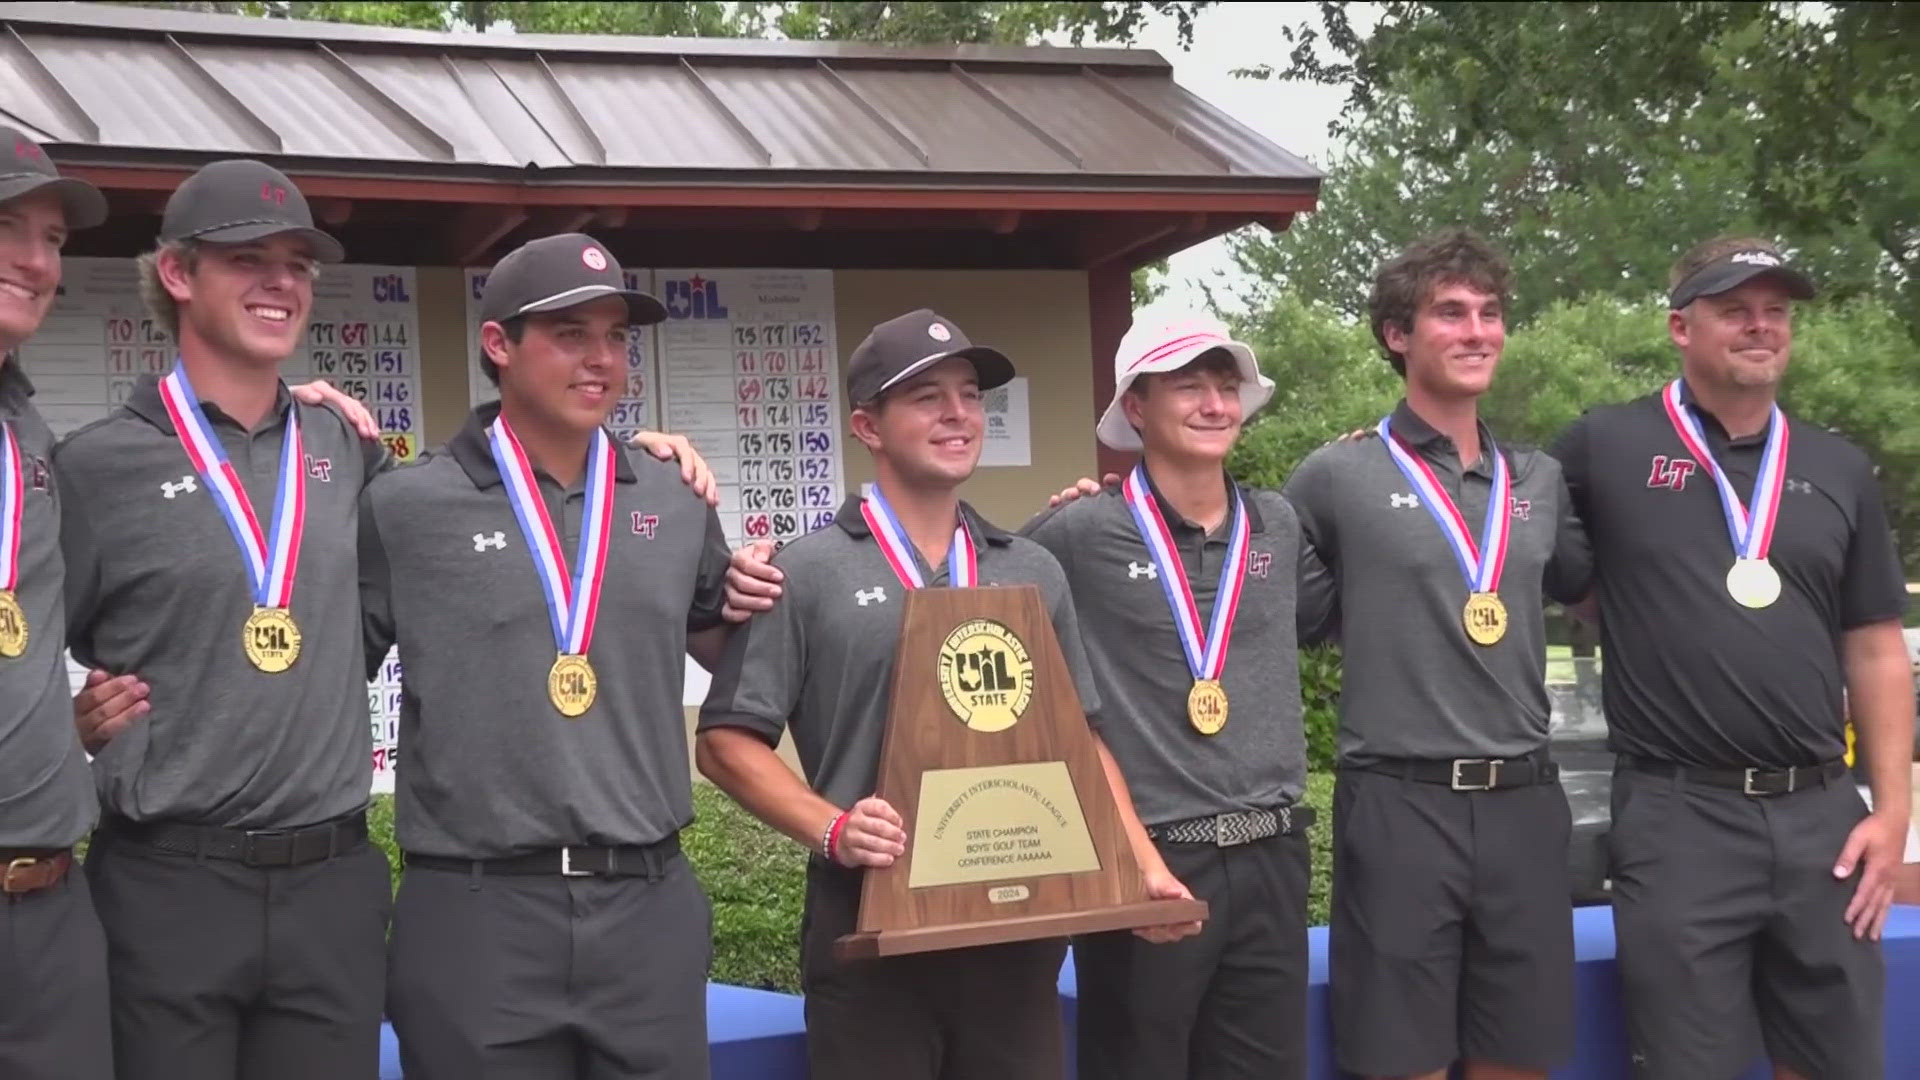 The Cavaliers fired 6-under par over the two-day tournament, beating out second place The Woodlands.